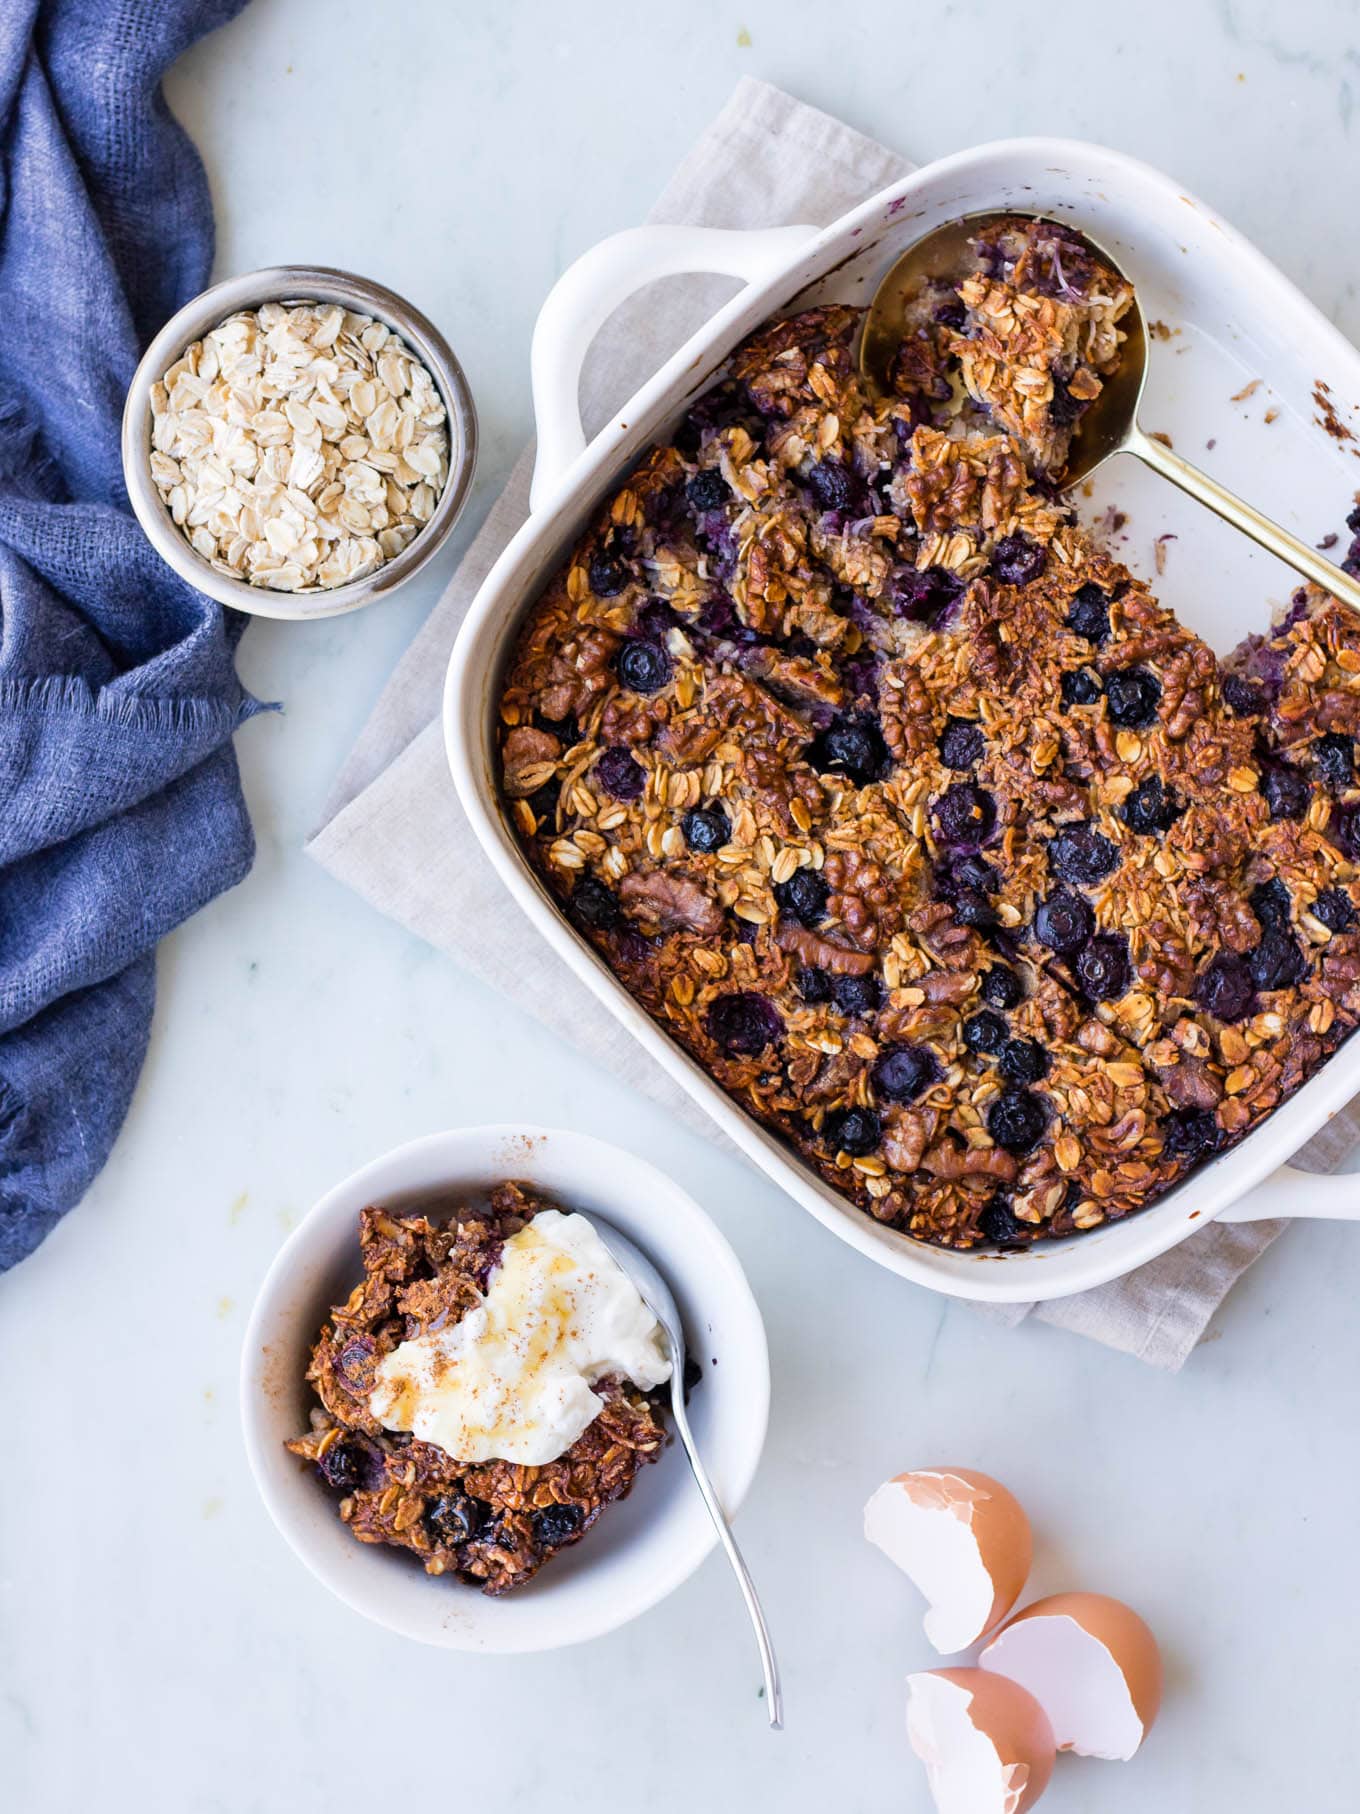 coconut blueberry baked oats in white baking dish, plus serving bowl